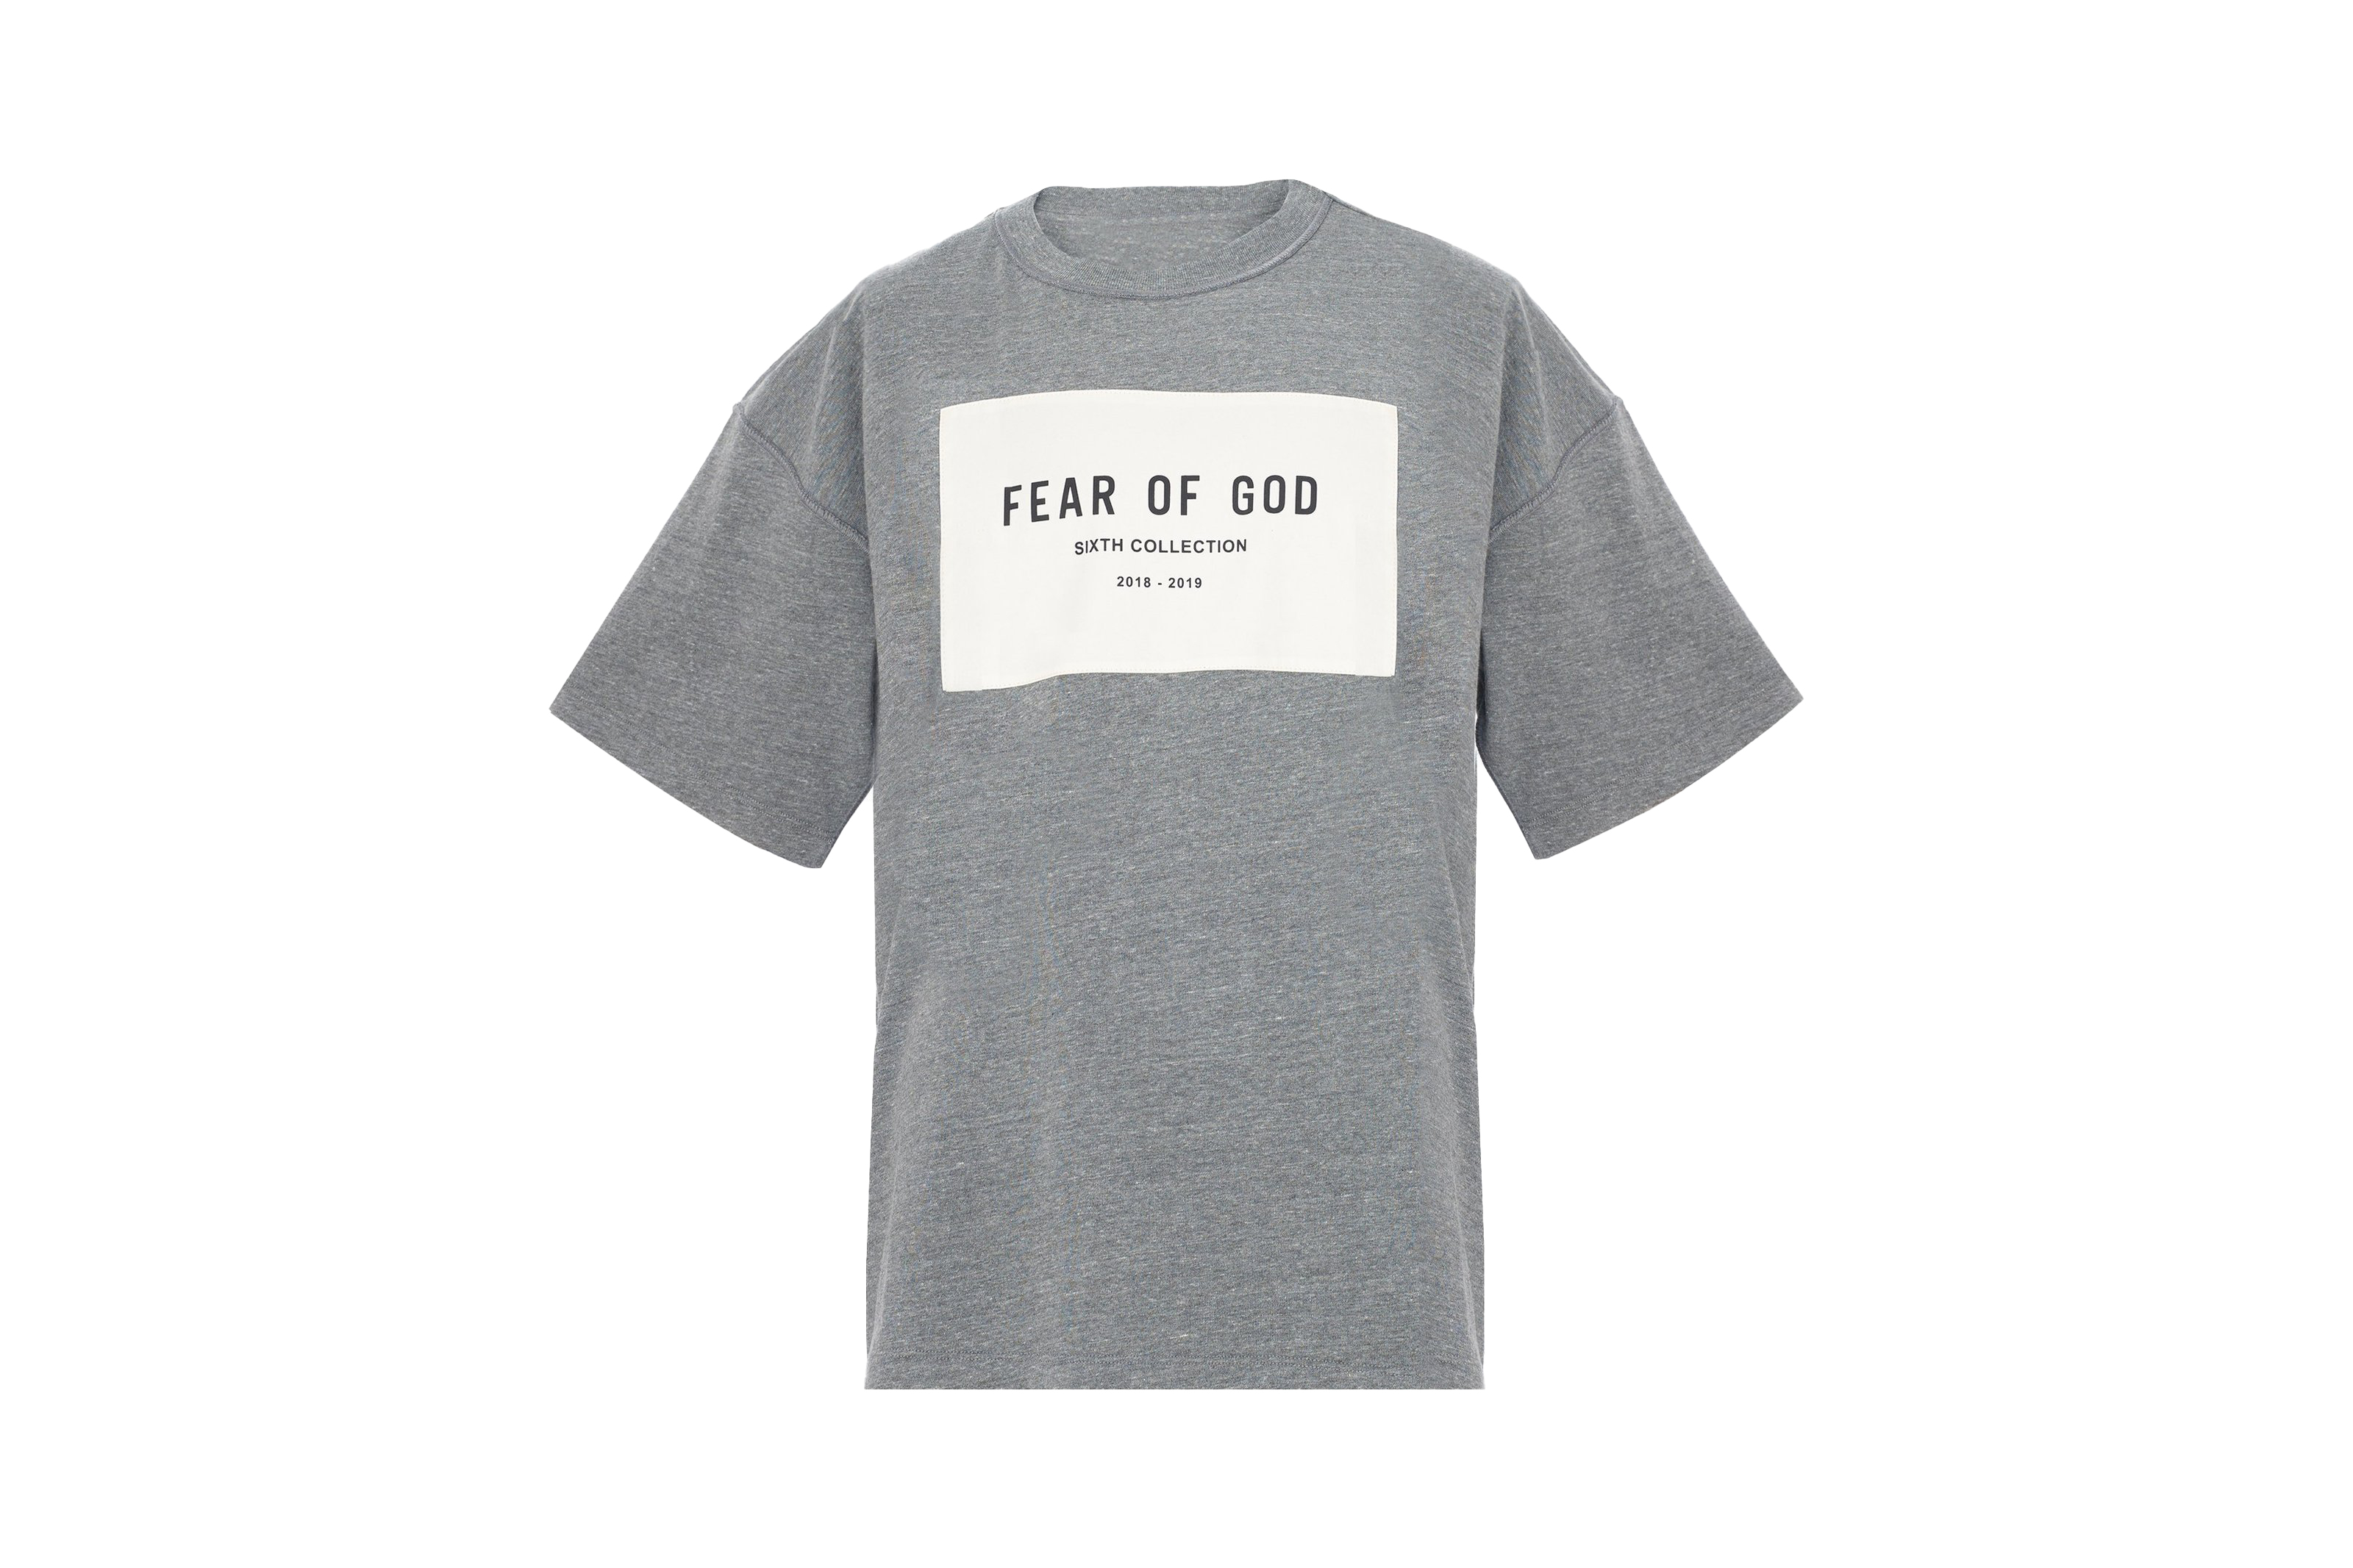 FEAR OF GOD Sixth Collection T-Shirt Heather Grey - SIXTH